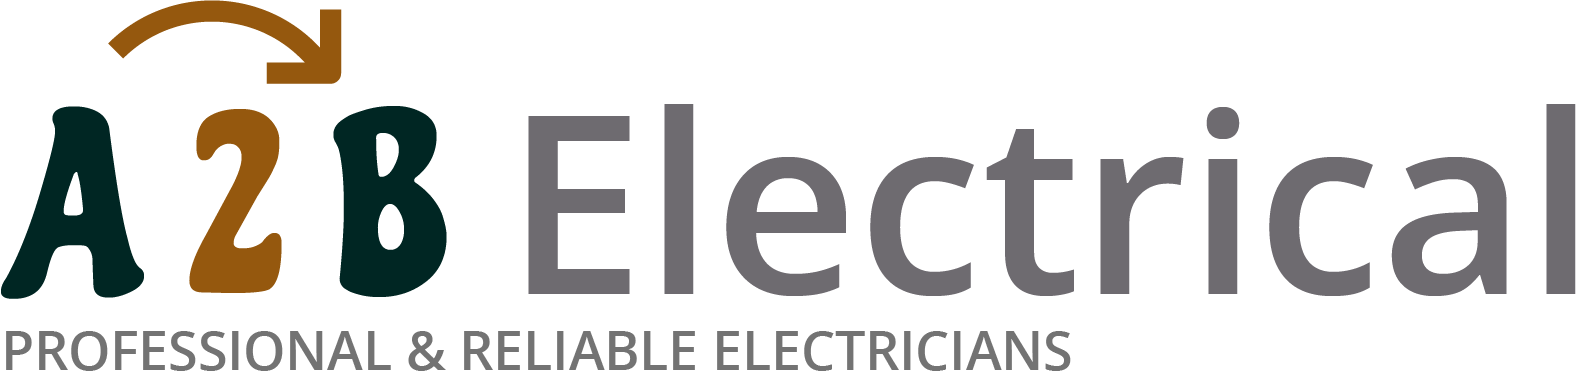 If you have electrical wiring problems in Telford, we can provide an electrician to have a look for you. 